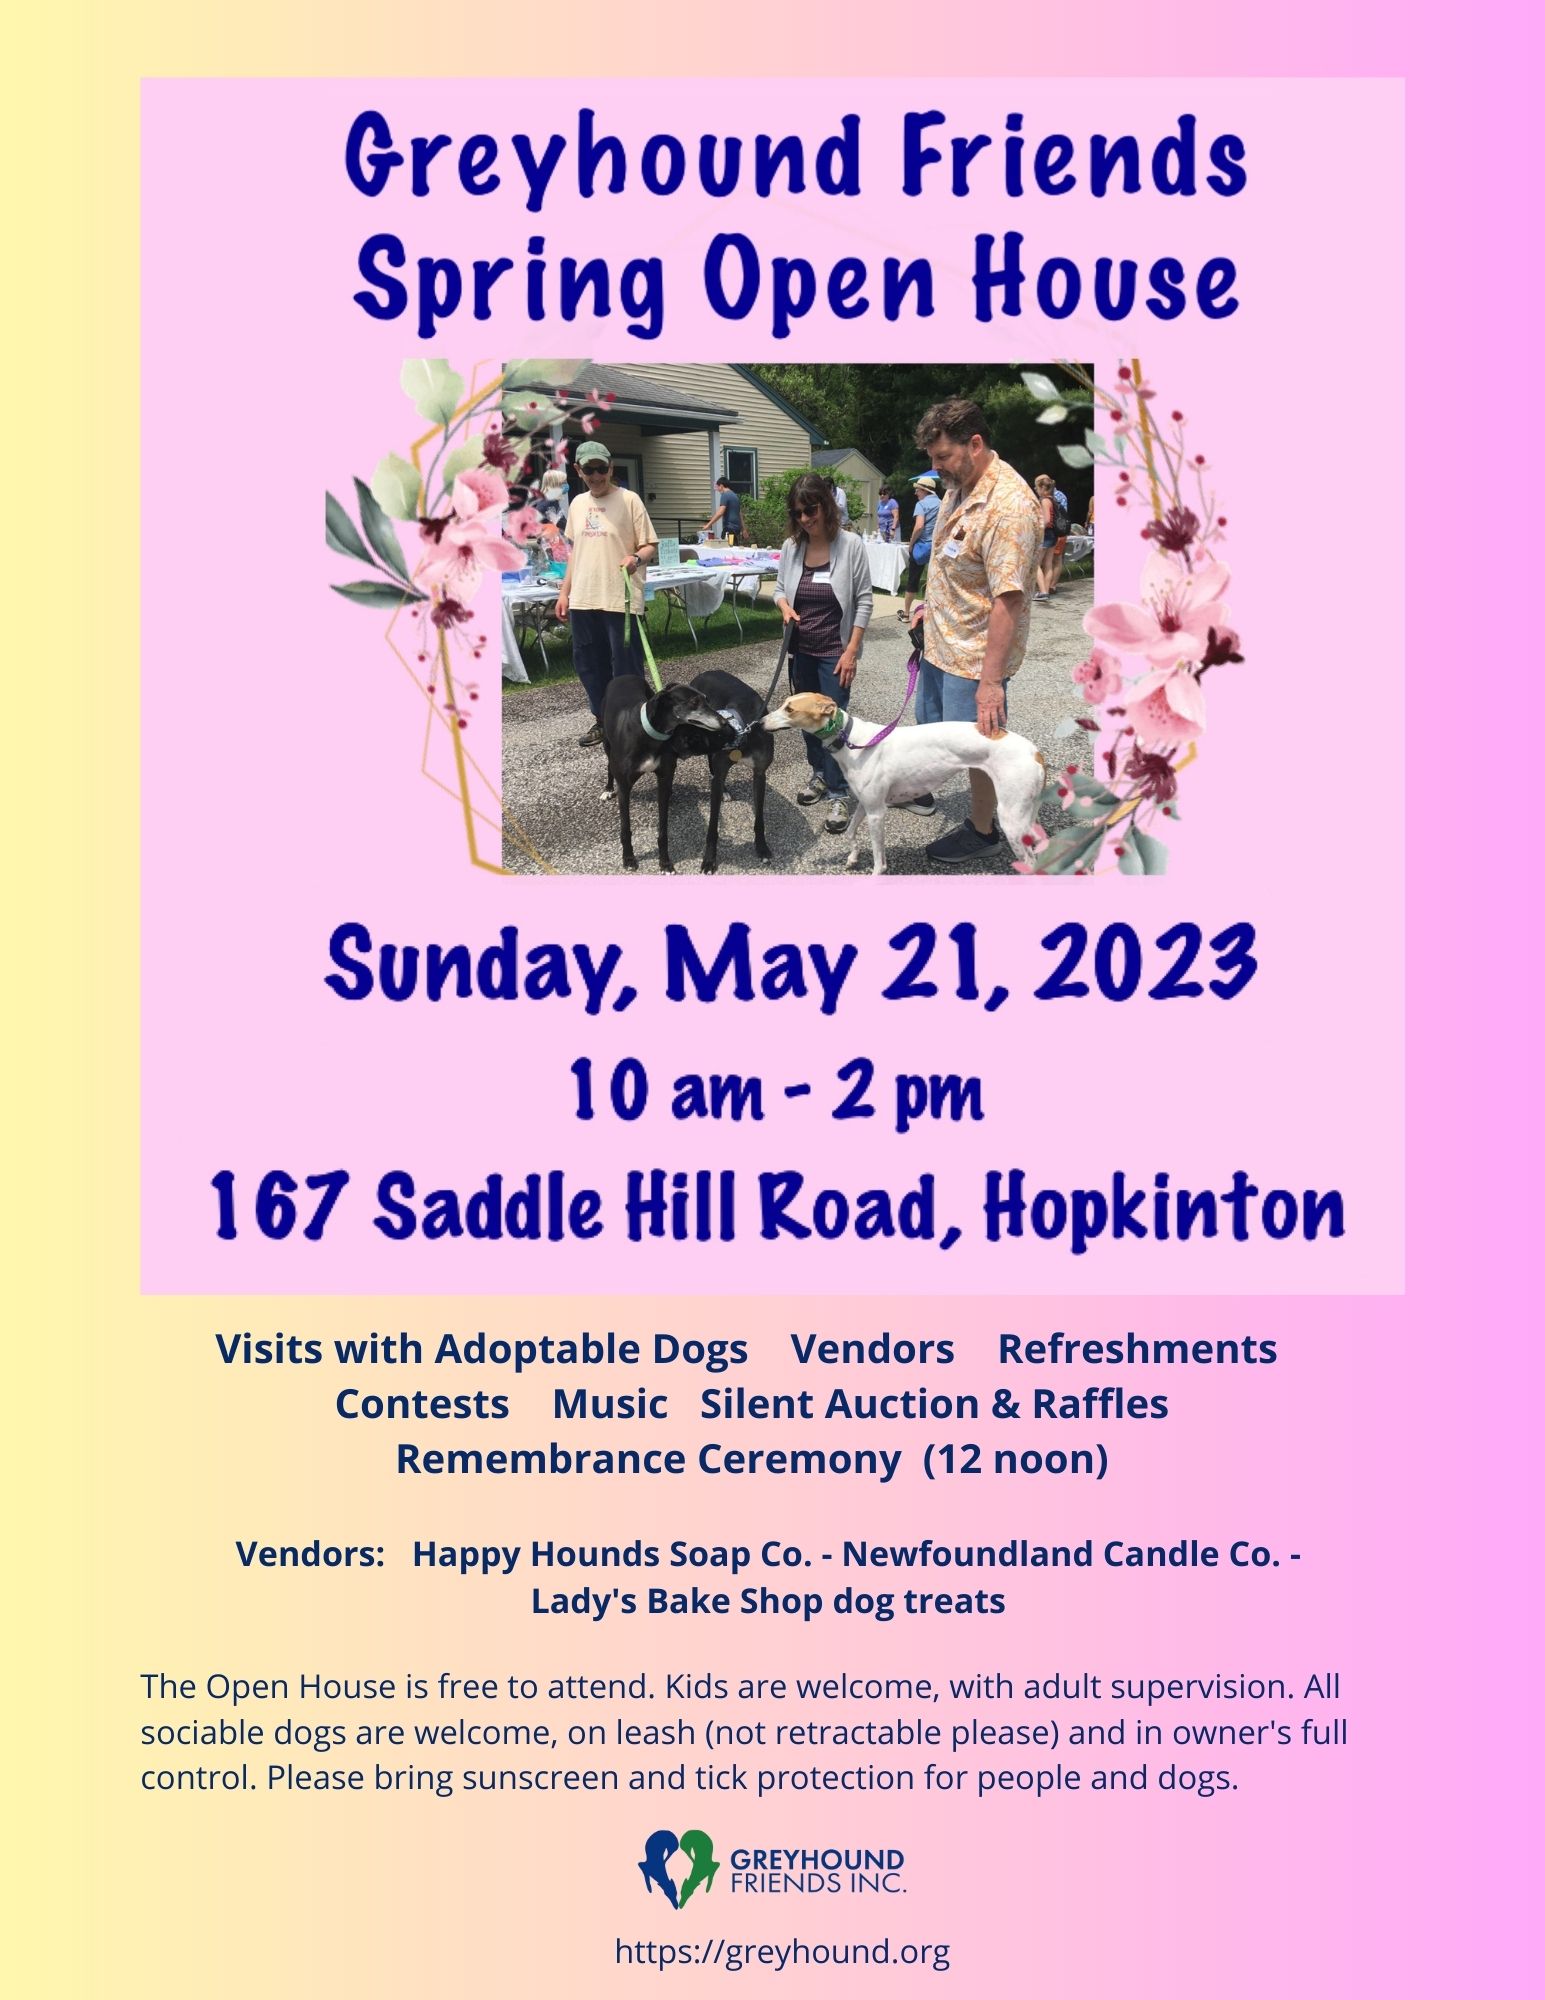 Greyhound Friends Spring Open House postponed to May 21